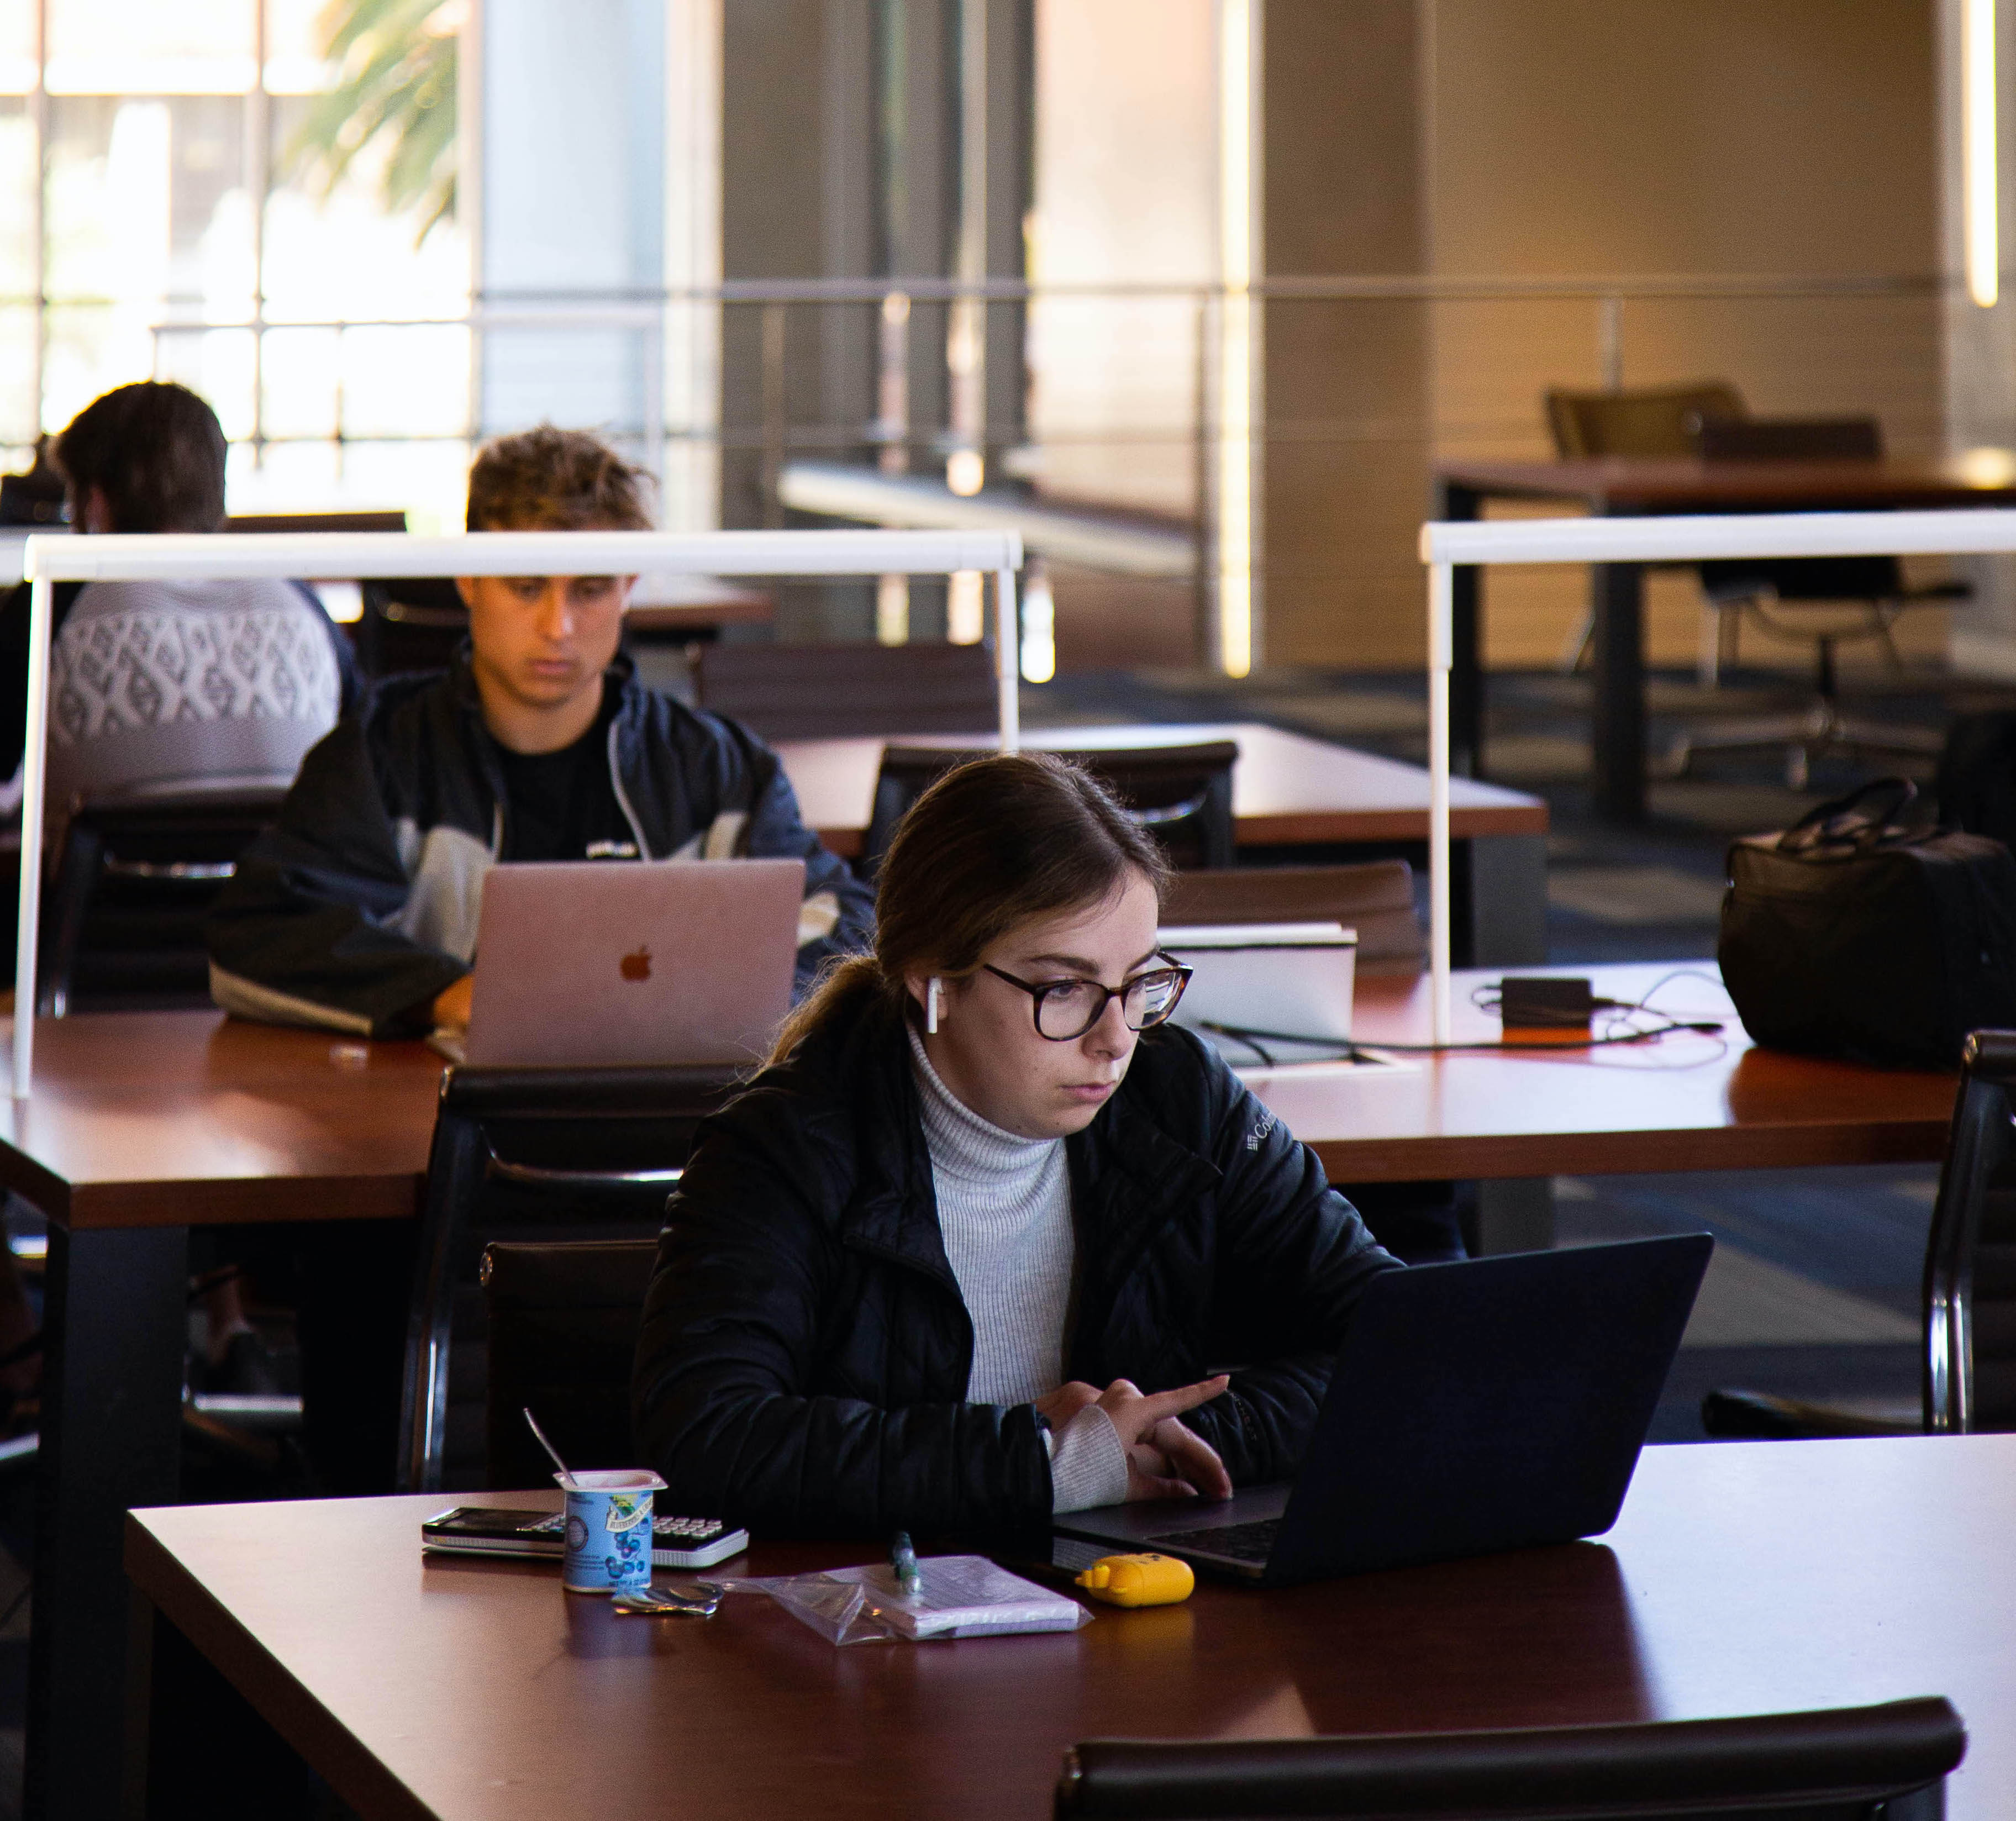 students on laptops in library